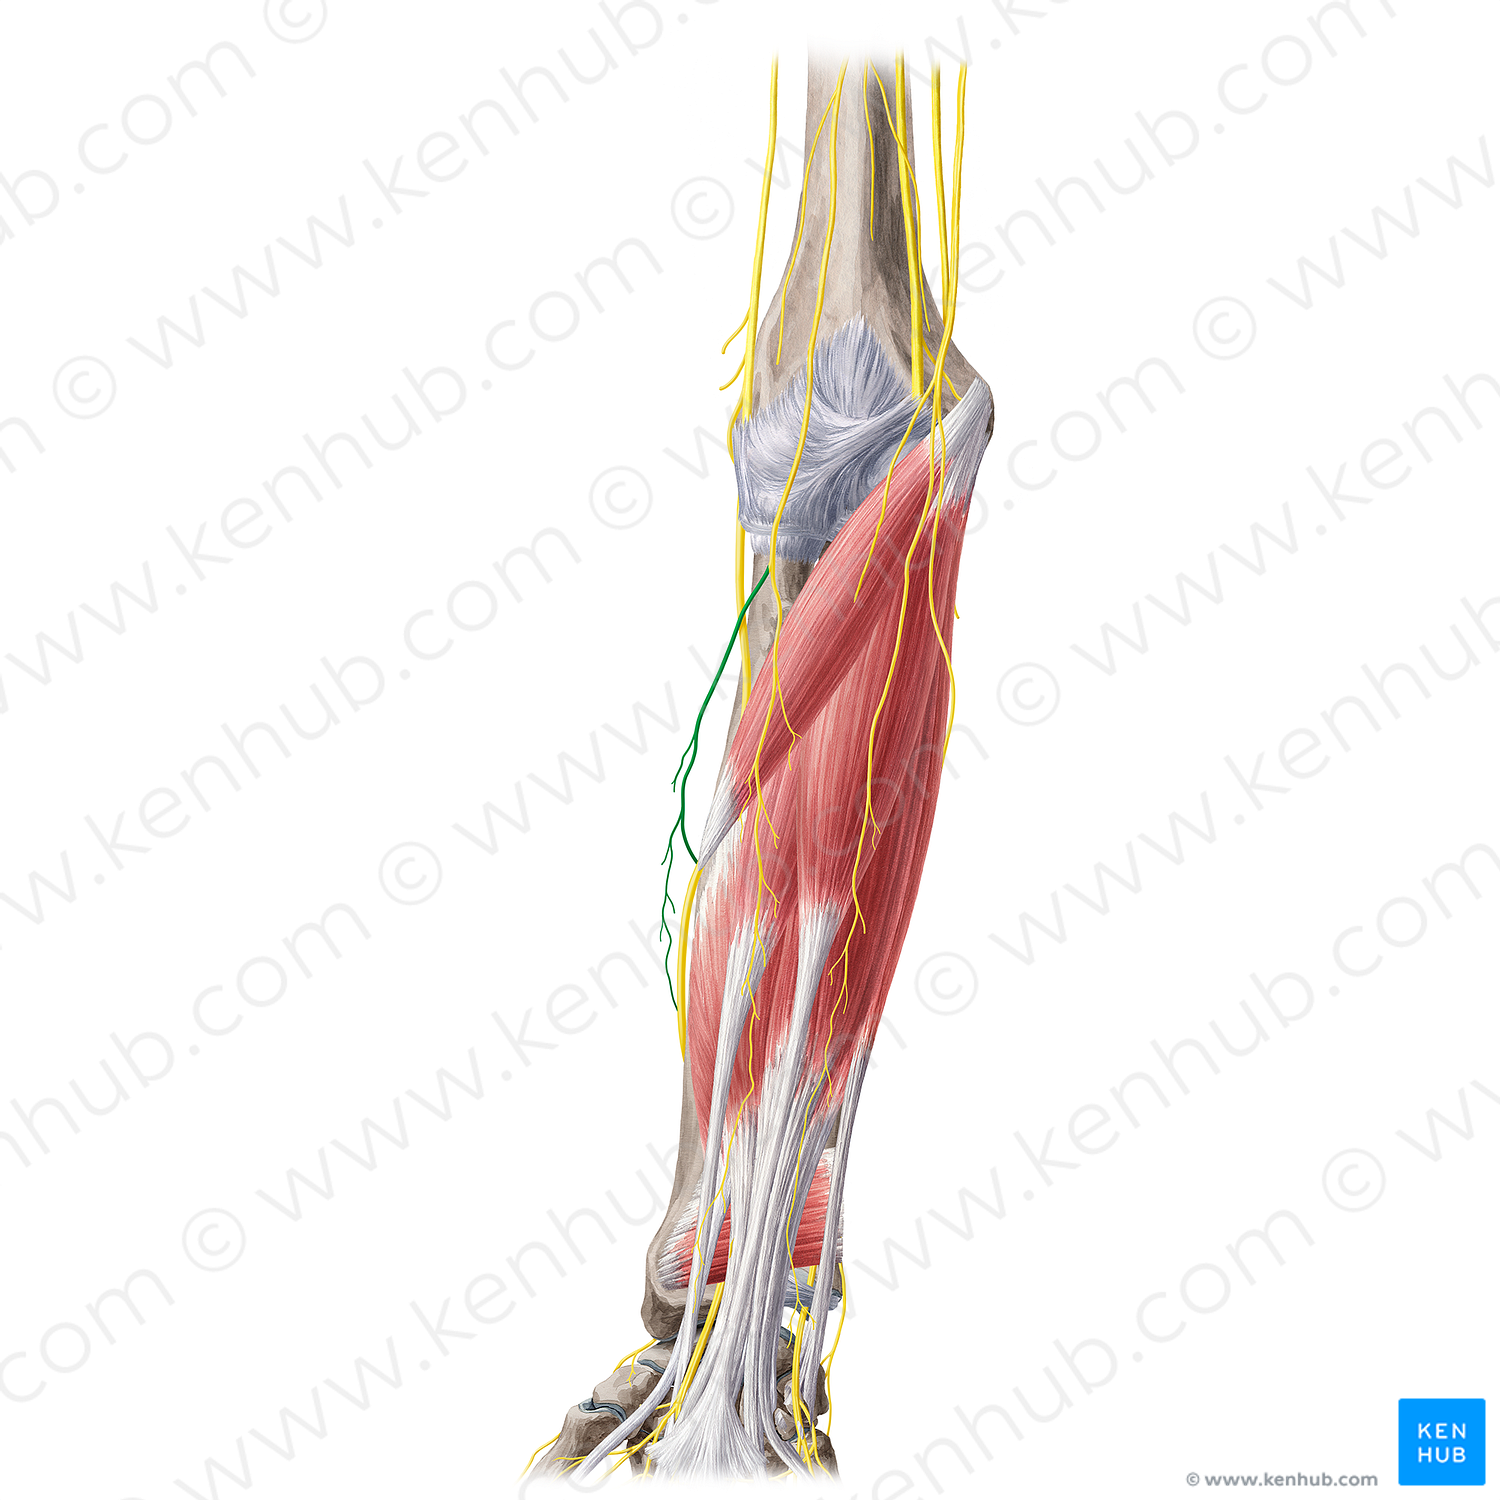 Posterior branch of lateral antebrachial cutaneous nerve (#20450)